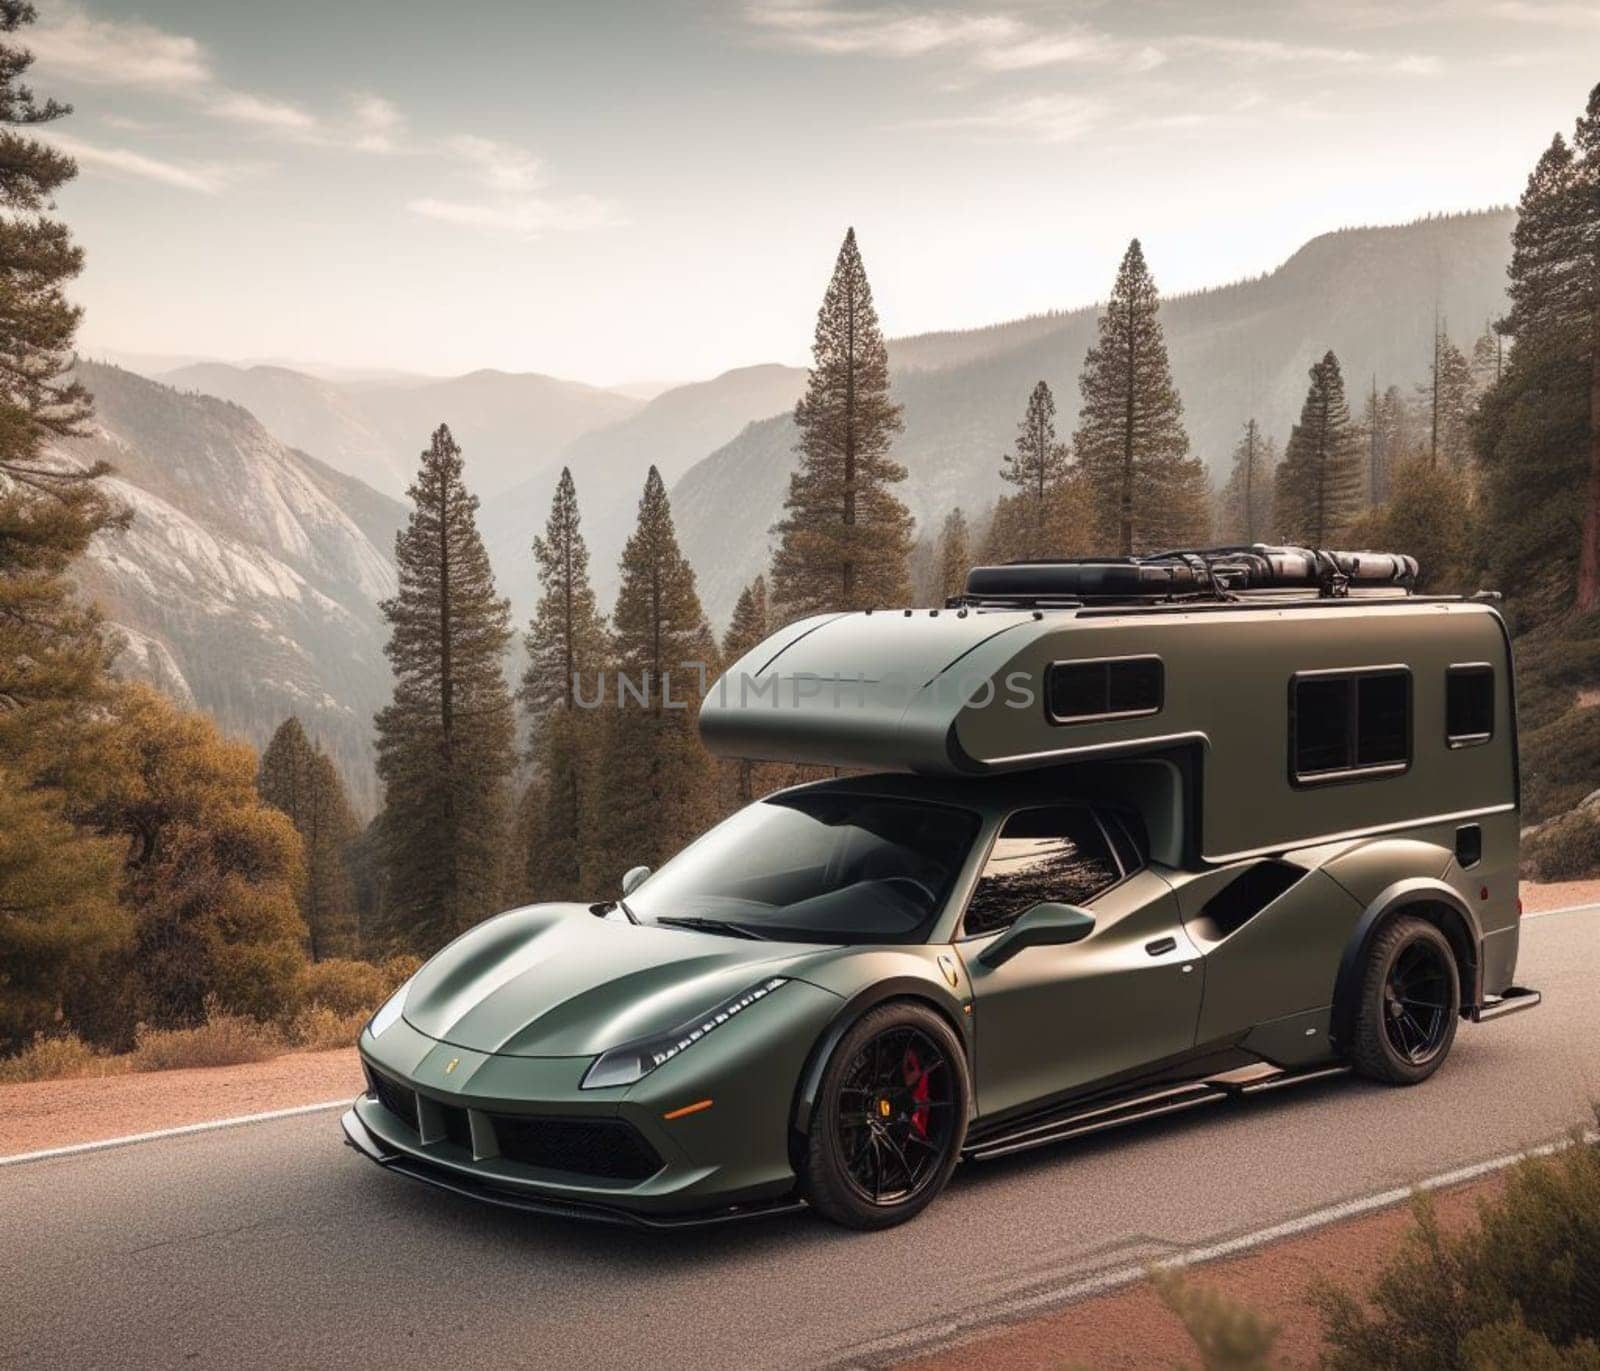 green matte special edition expensive offoroad 4x4 fast sports luxury supercar design camper van conversion for digital nomad avdenture weekender ai art generated